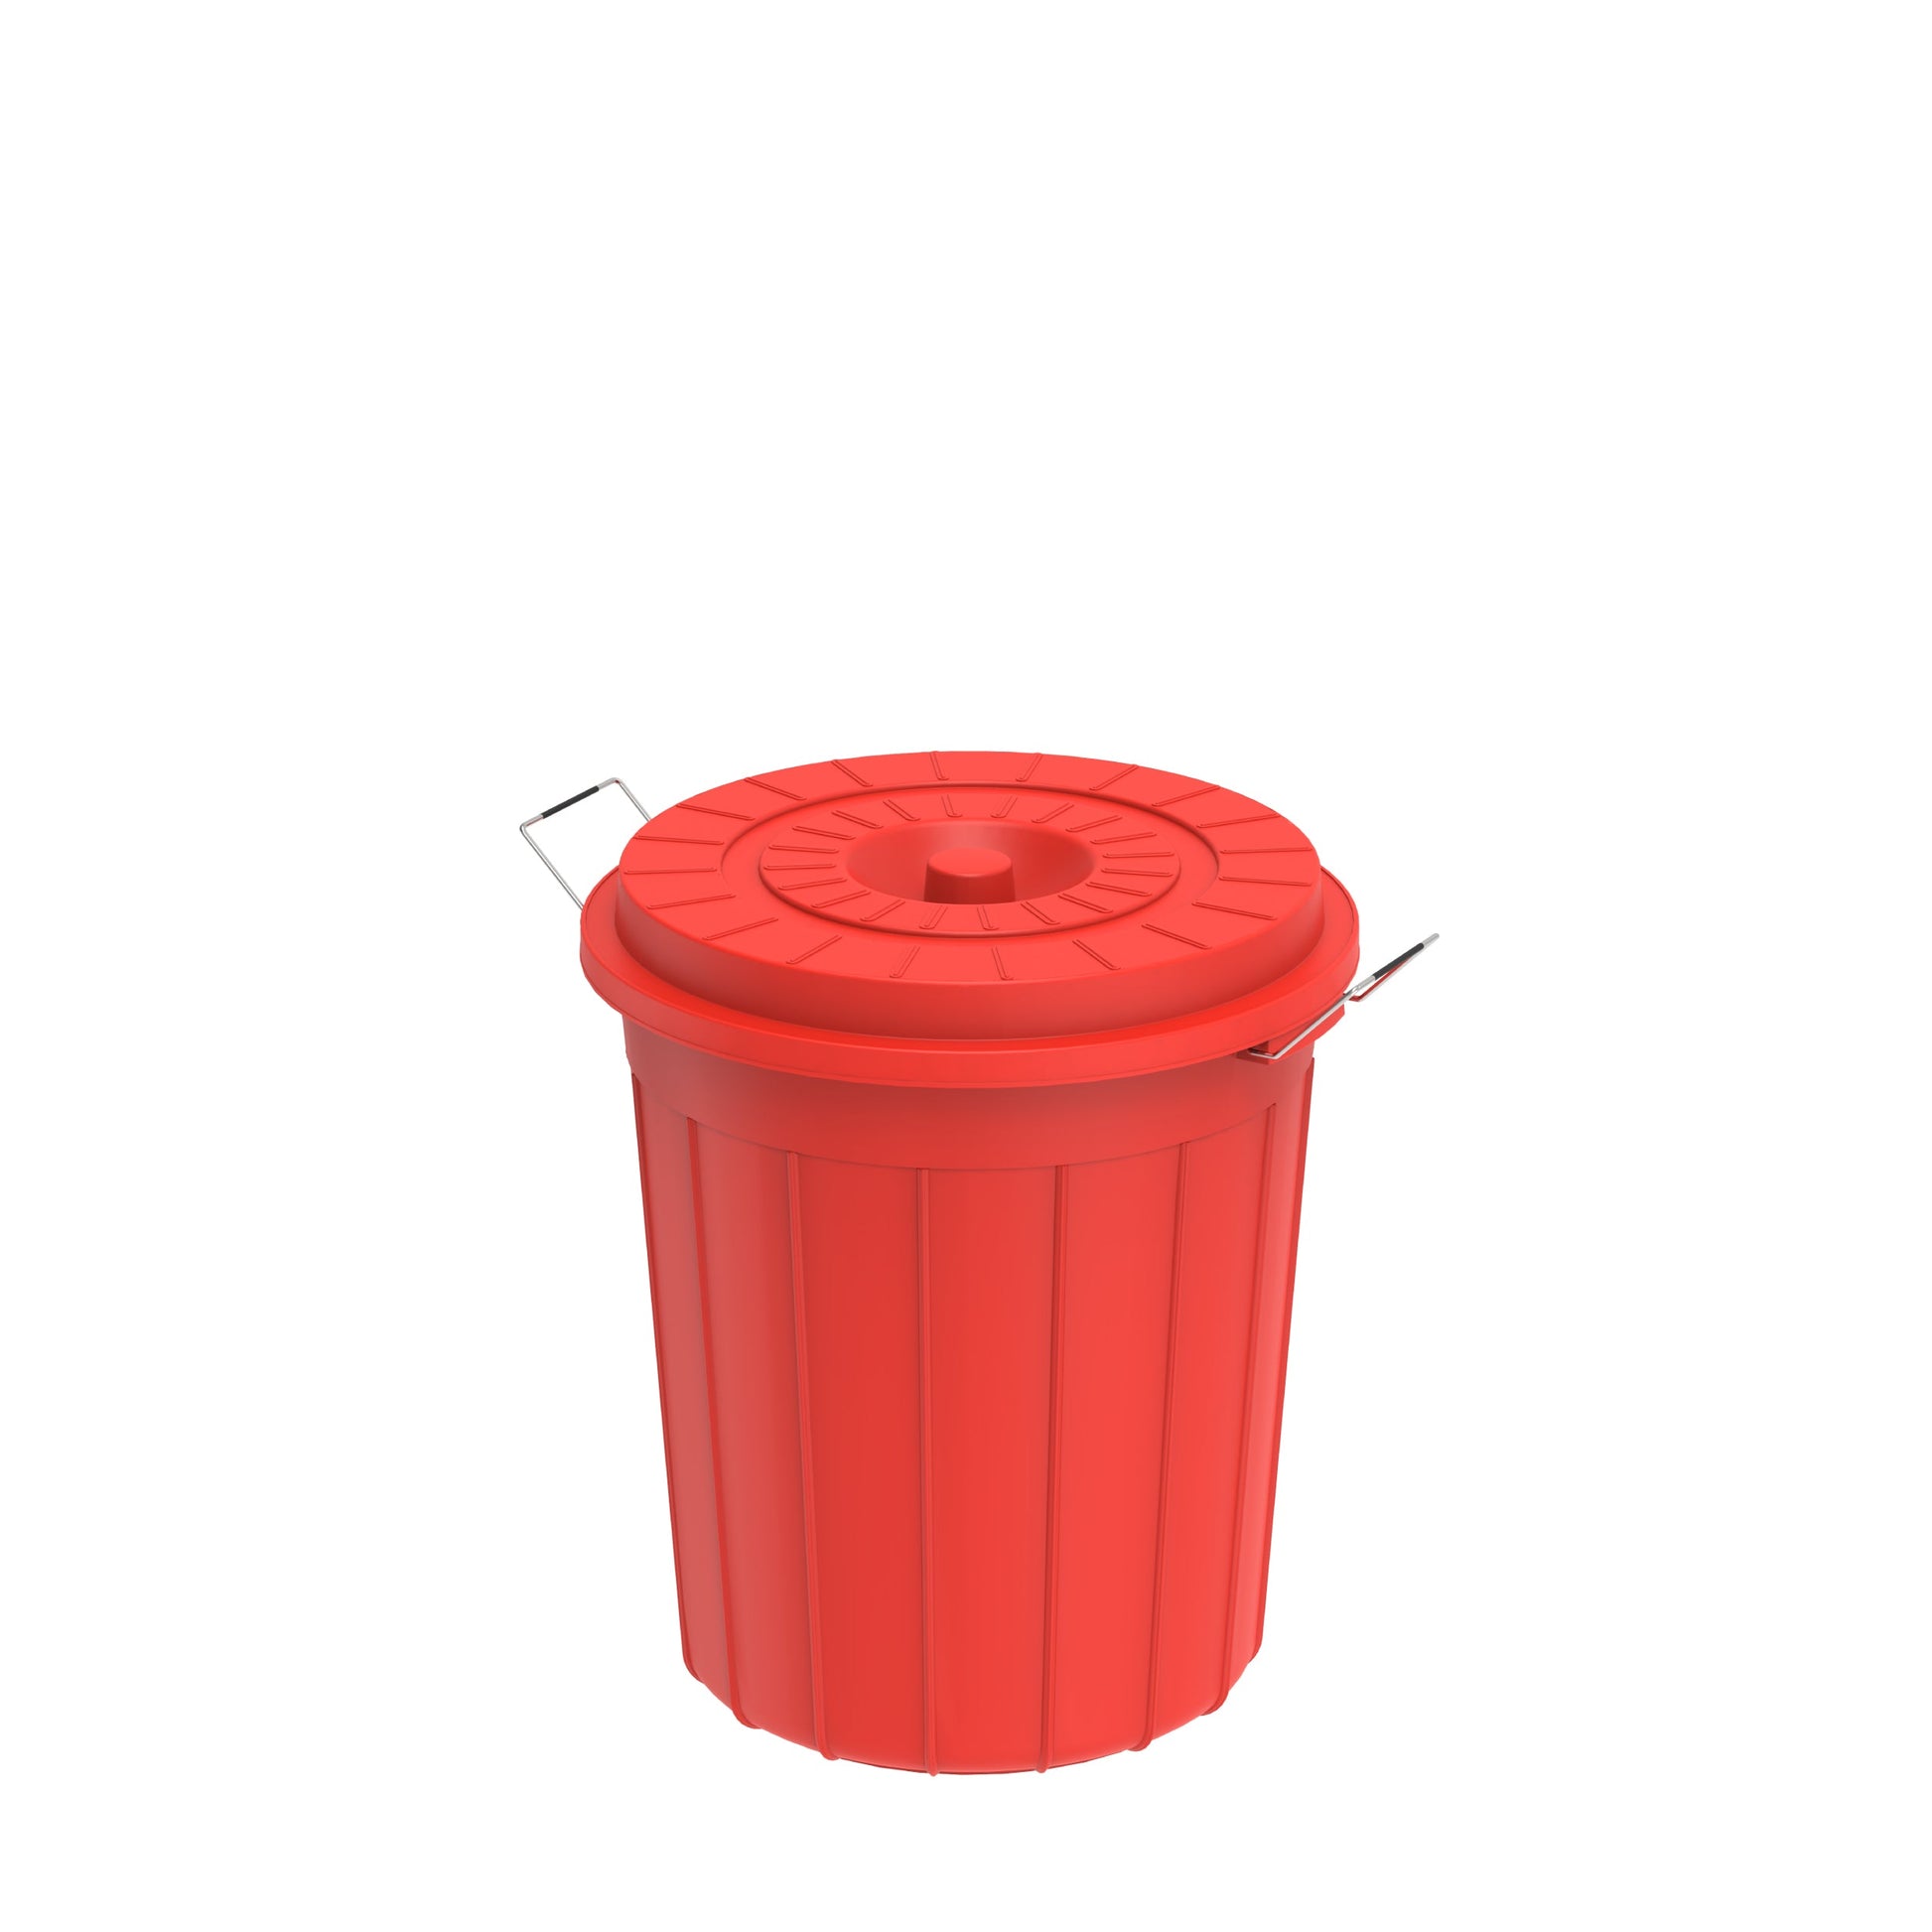 35L Round Plastic Drums with Lid - Cosmoplast Bahrain